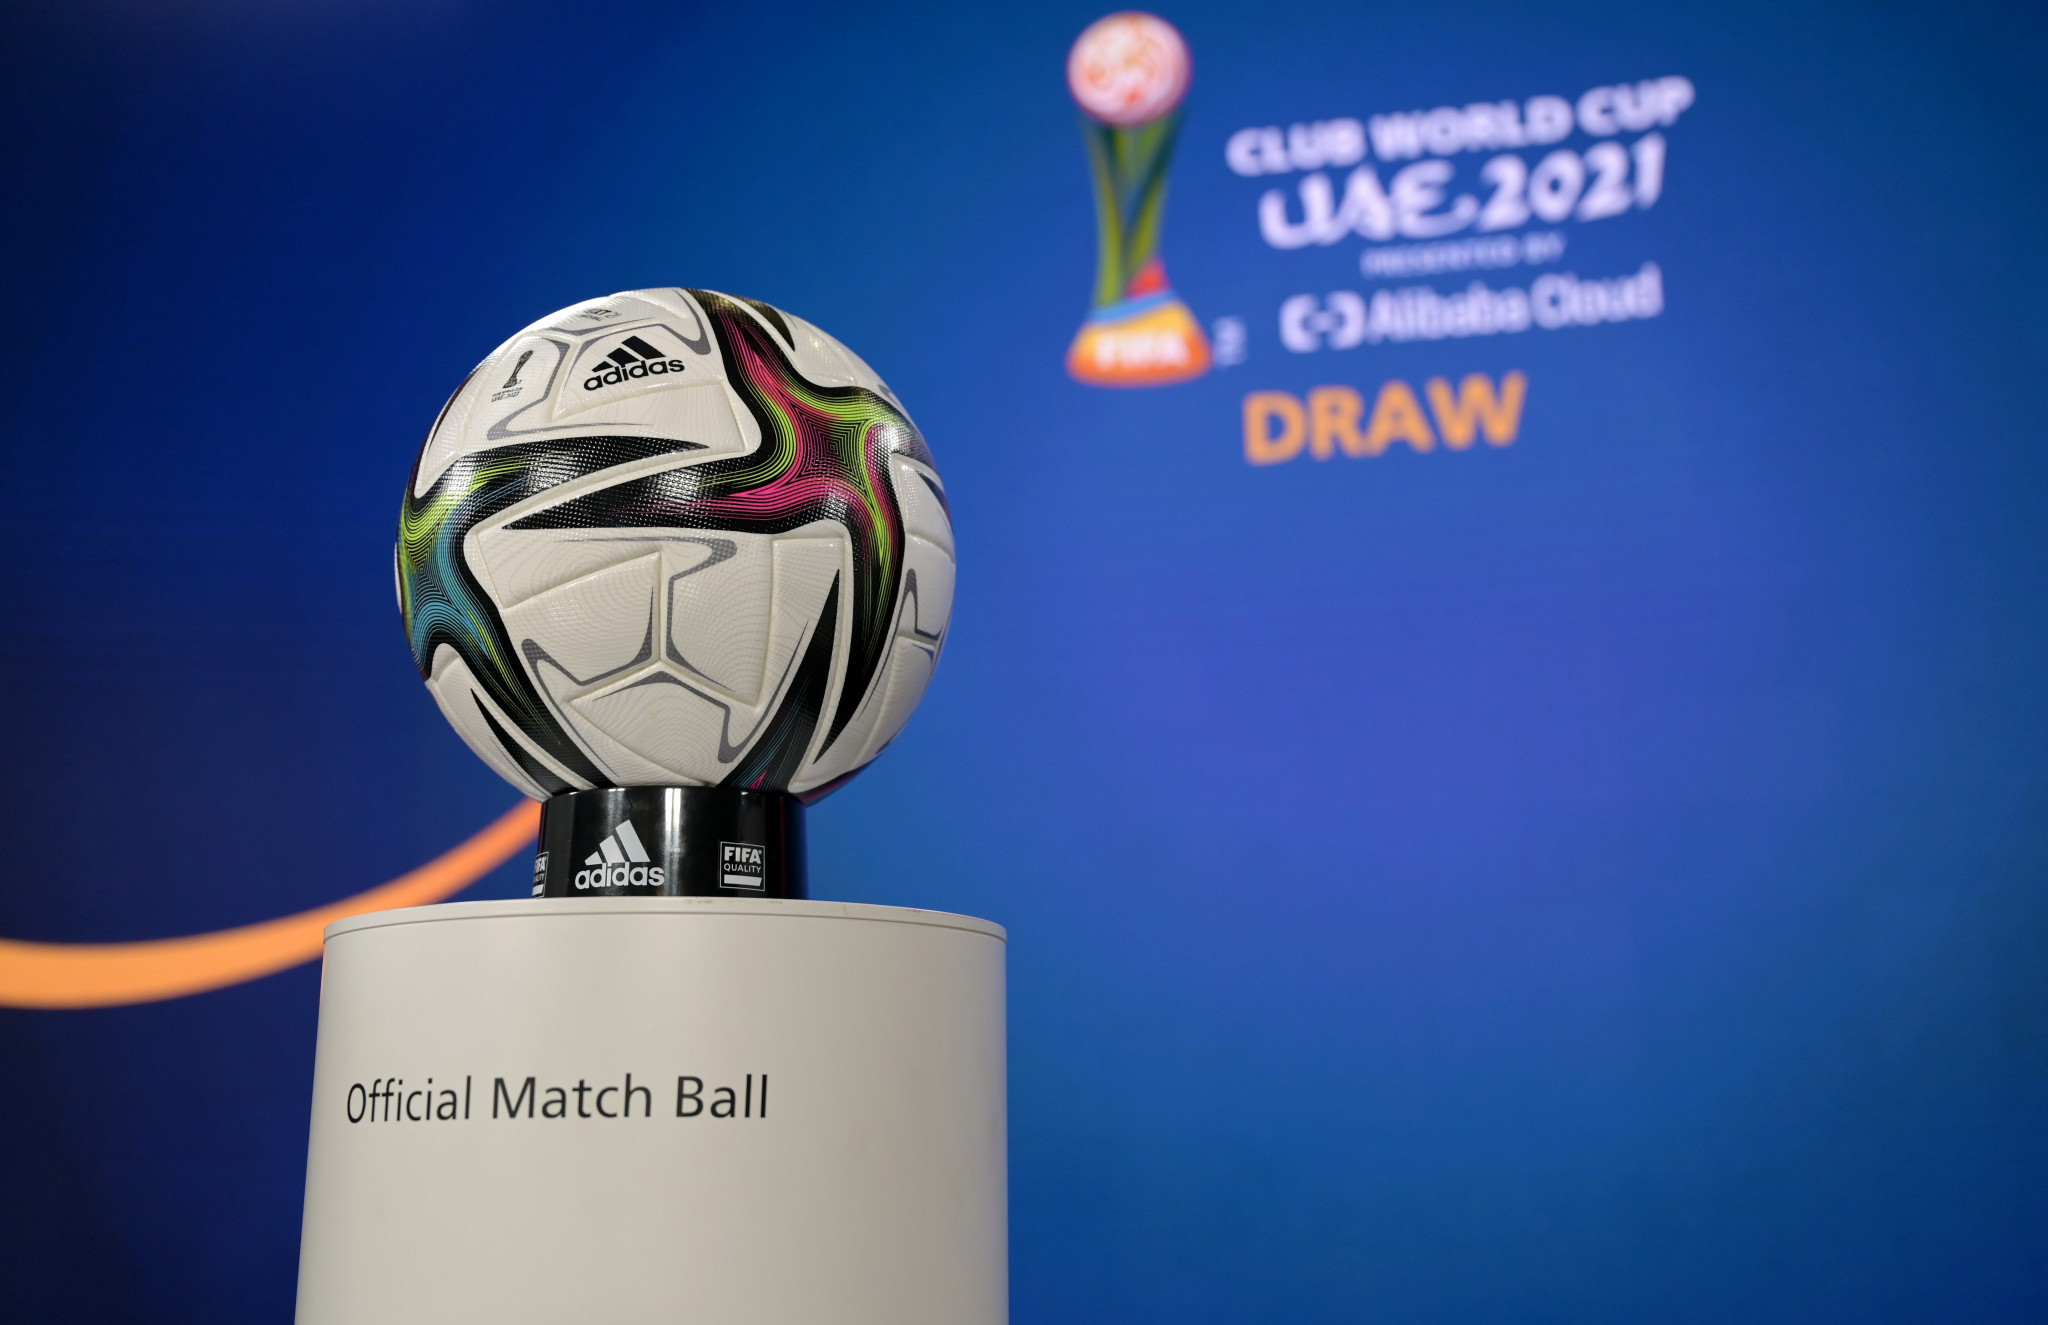 Seven clubs will battle it out for the FIFA Club World Cup title in February ©FIFA